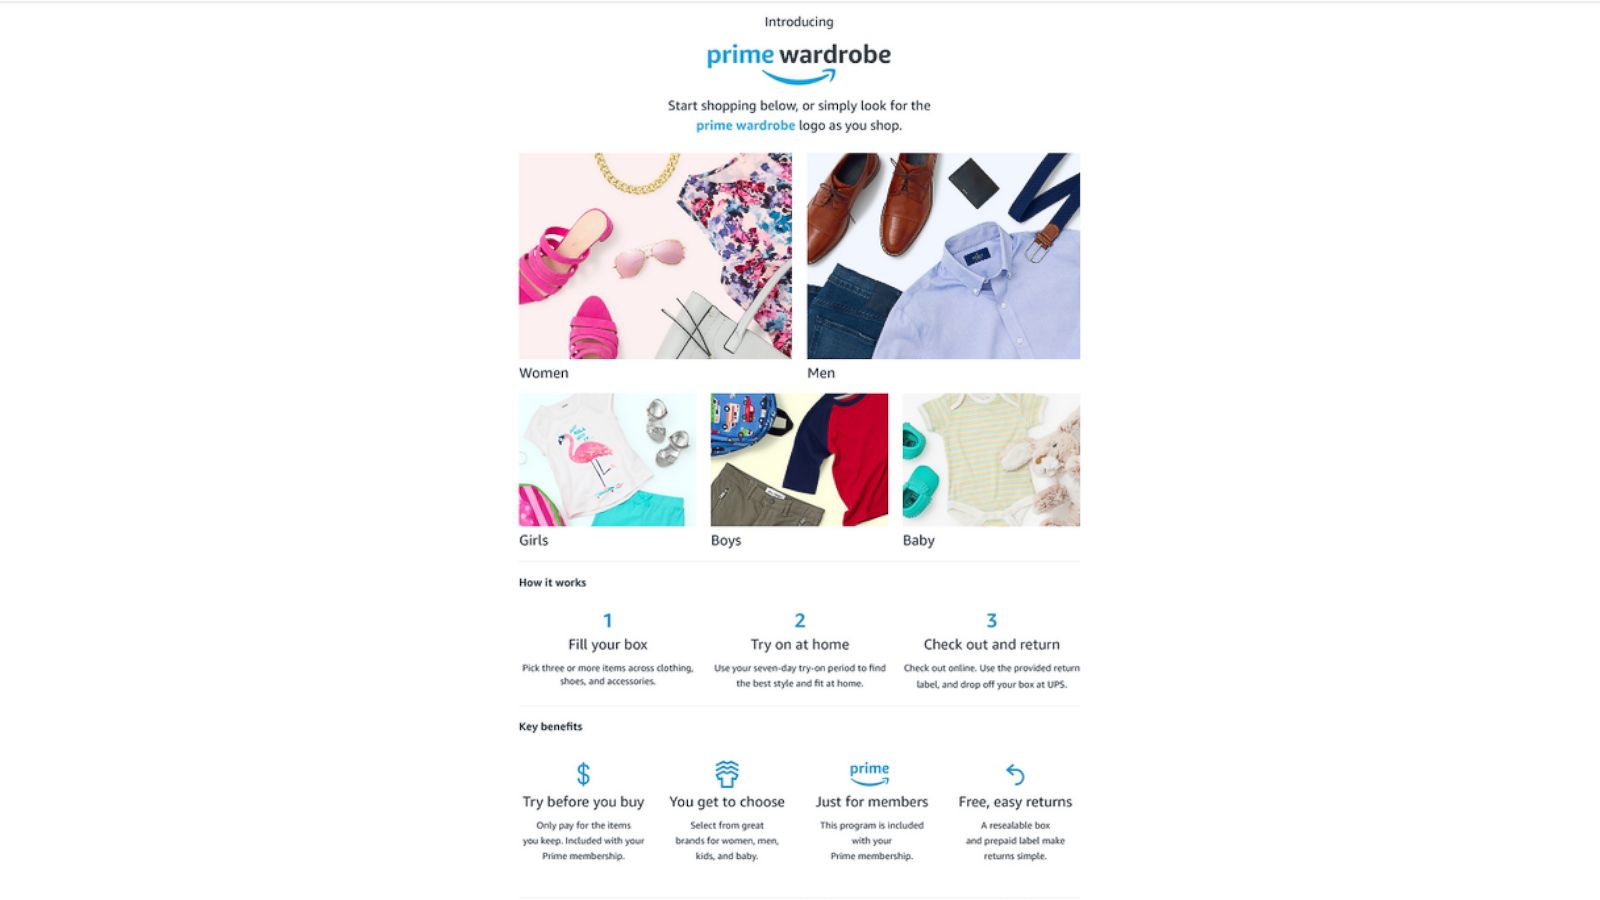 Fashion Prime Try Before you buy has been a convenient way